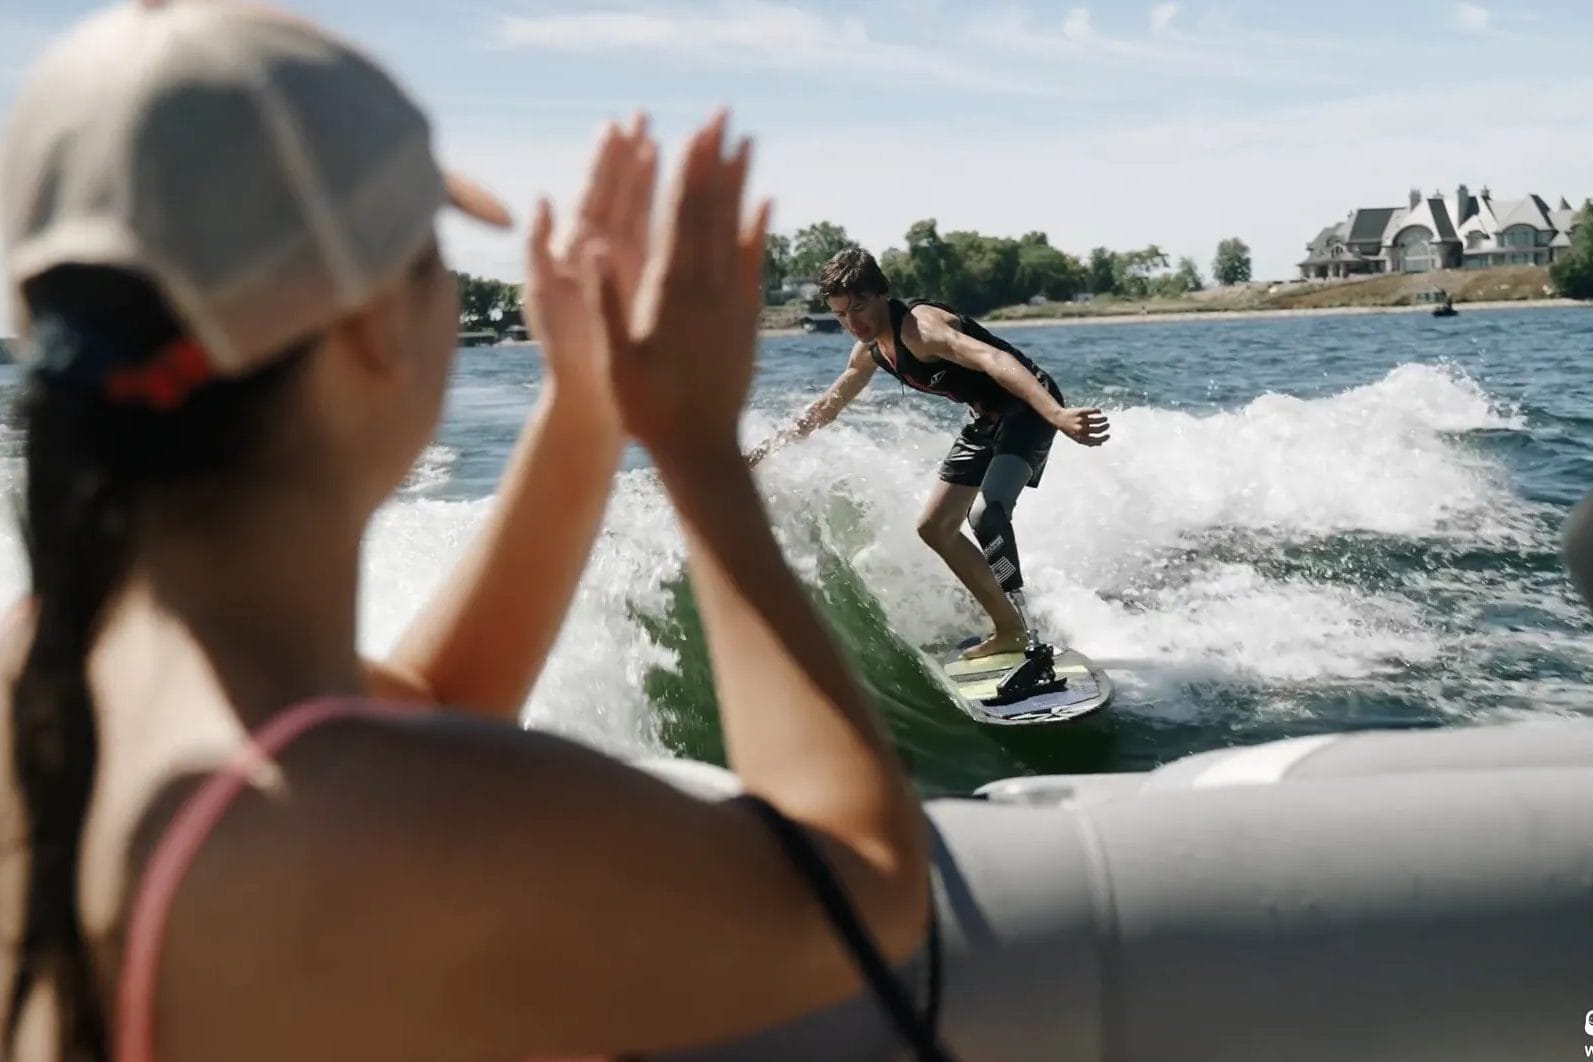 A woman is riding a wakeboard on a boat.